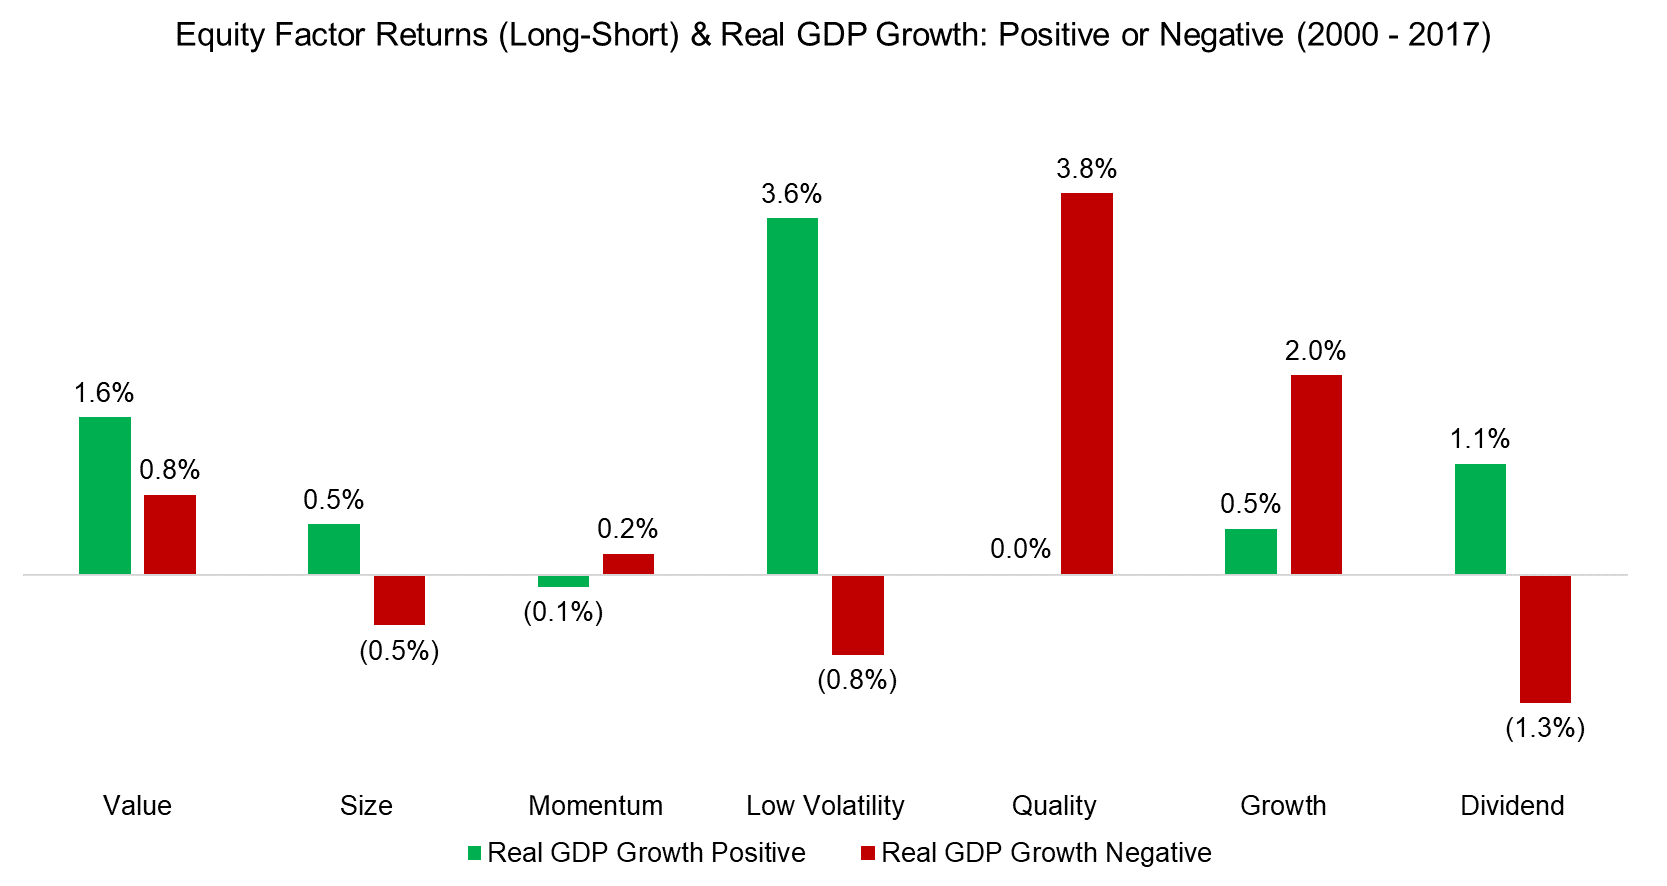 Equity Factor Returns (Long-Short) & Real GDP Growth Positive or Negative (2000 - 2017)